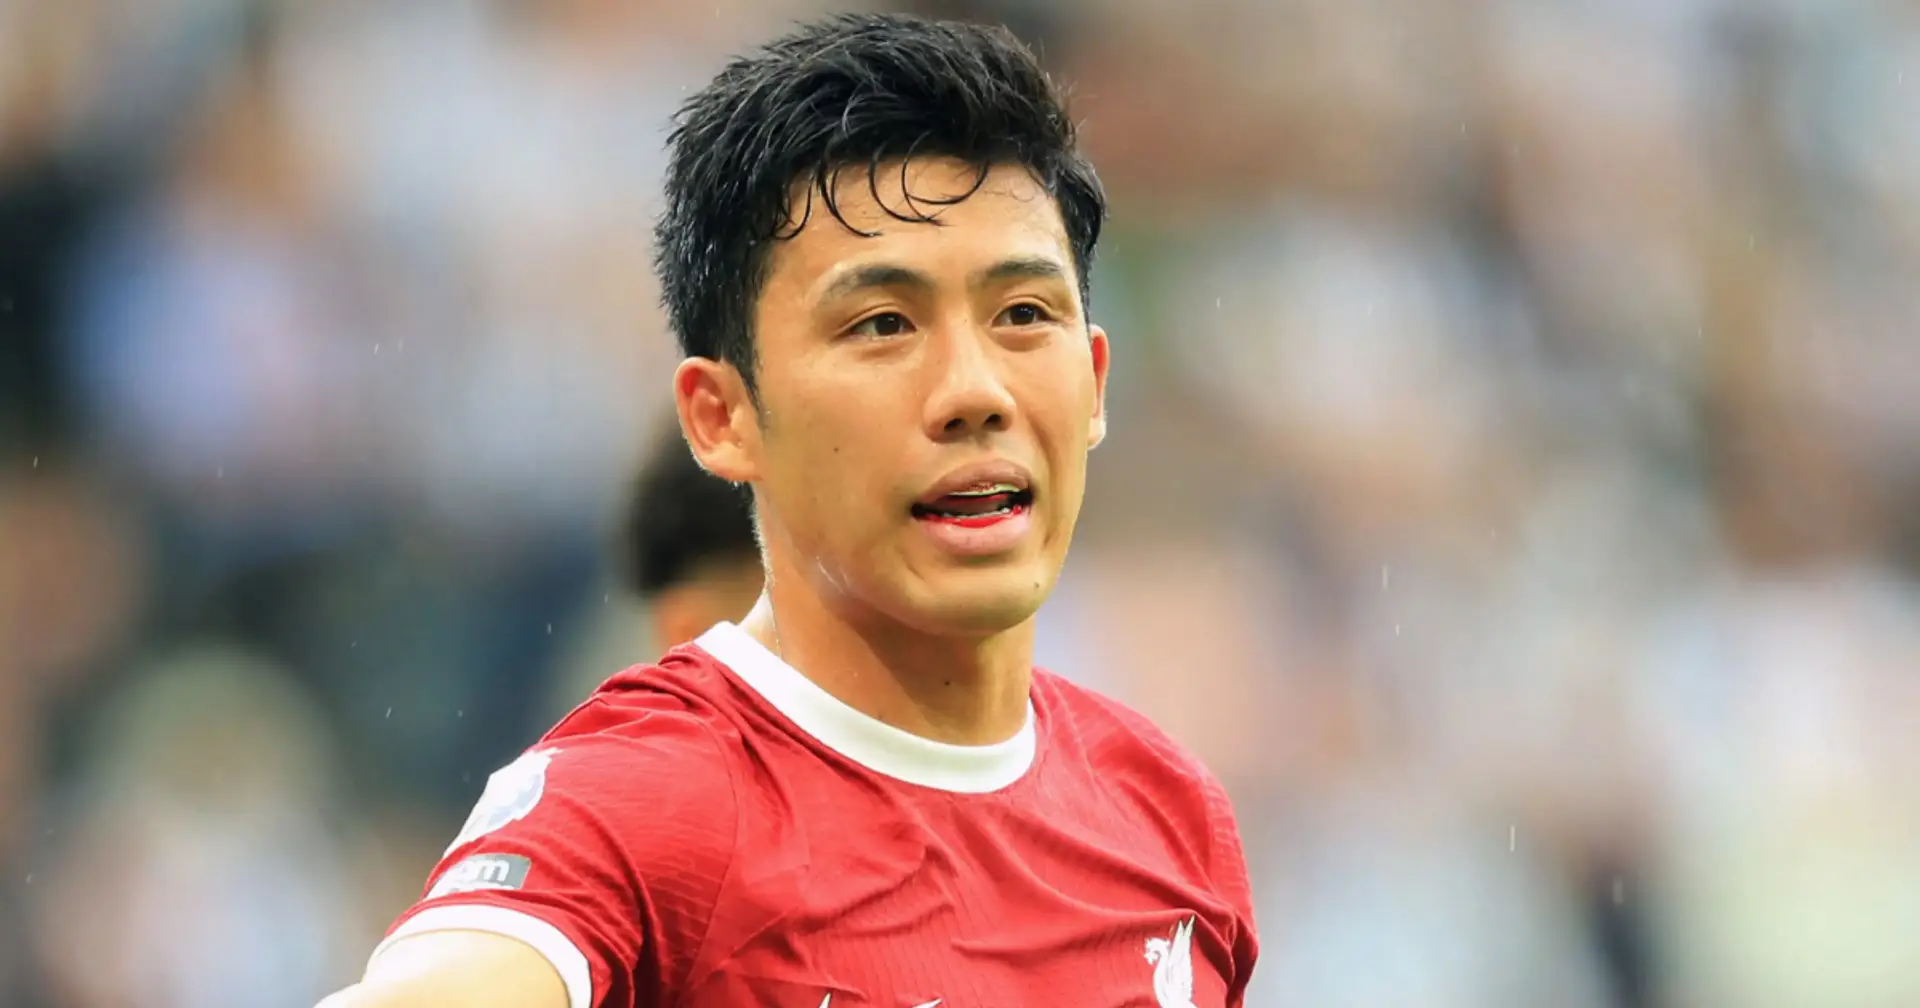 Liverpool could sell Endo in summer (reliability: 3 stars)